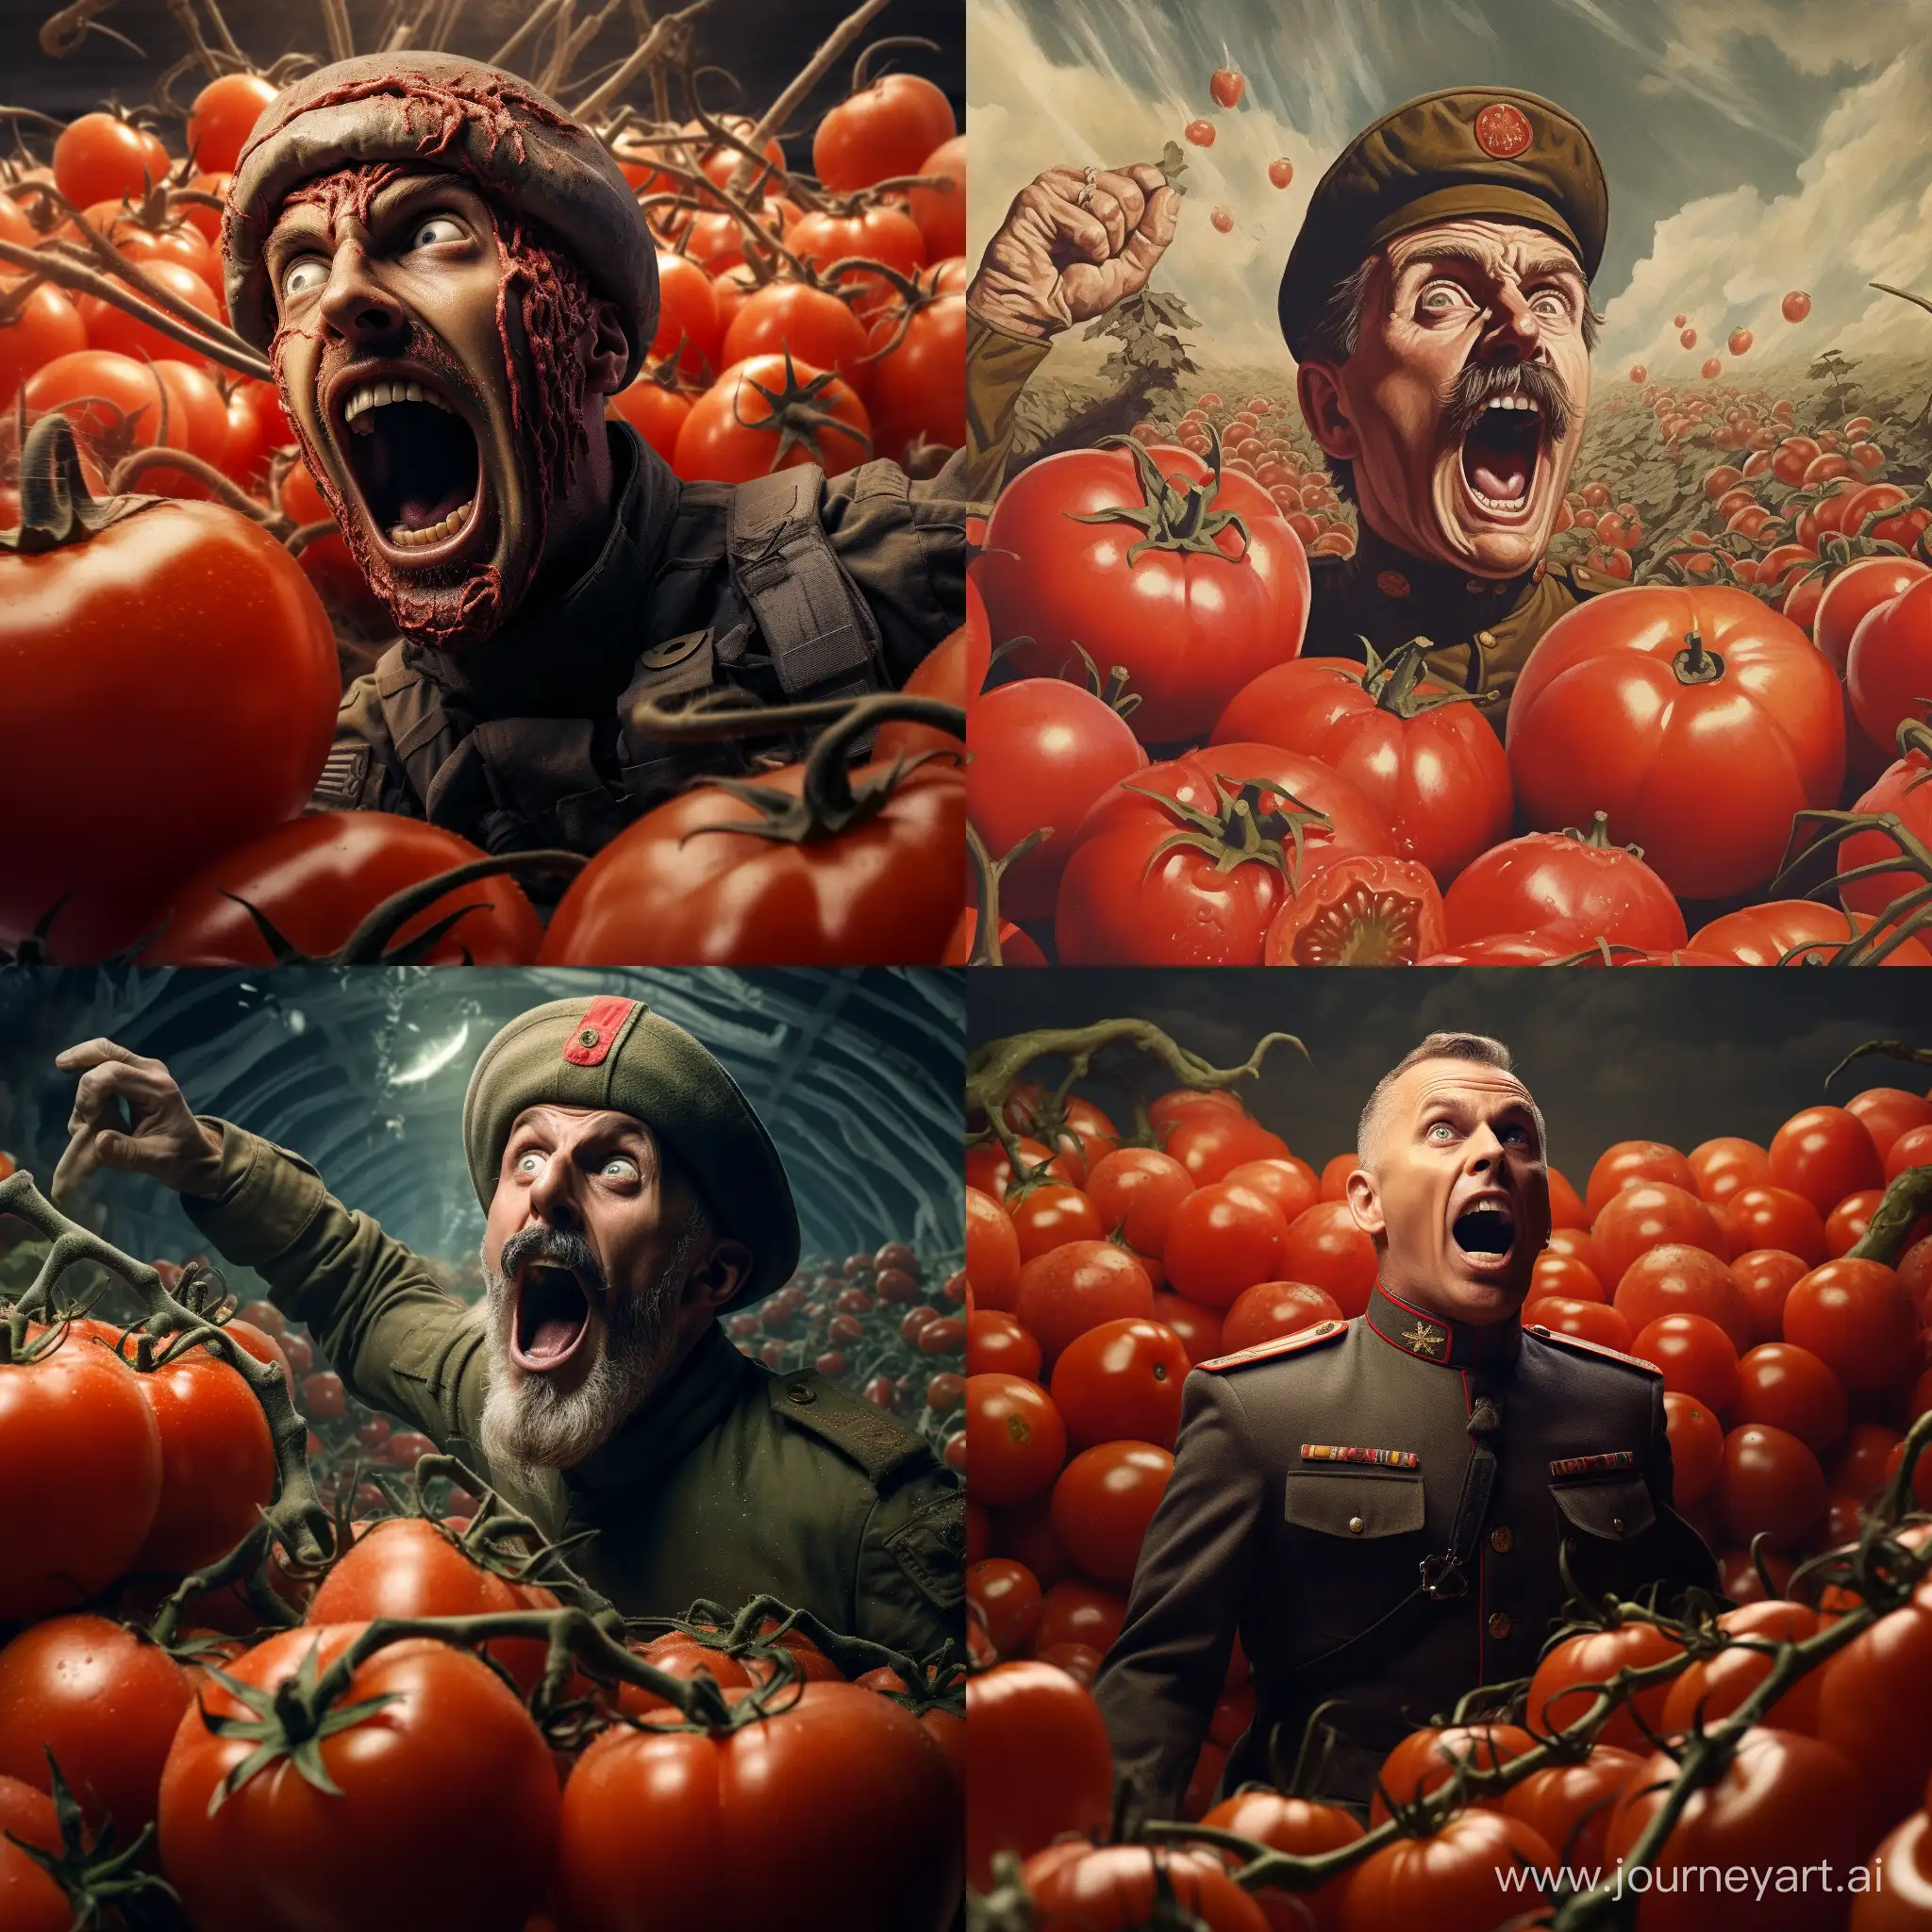 Soldier-Shouting-at-Tomatoes-in-Intense-Anger